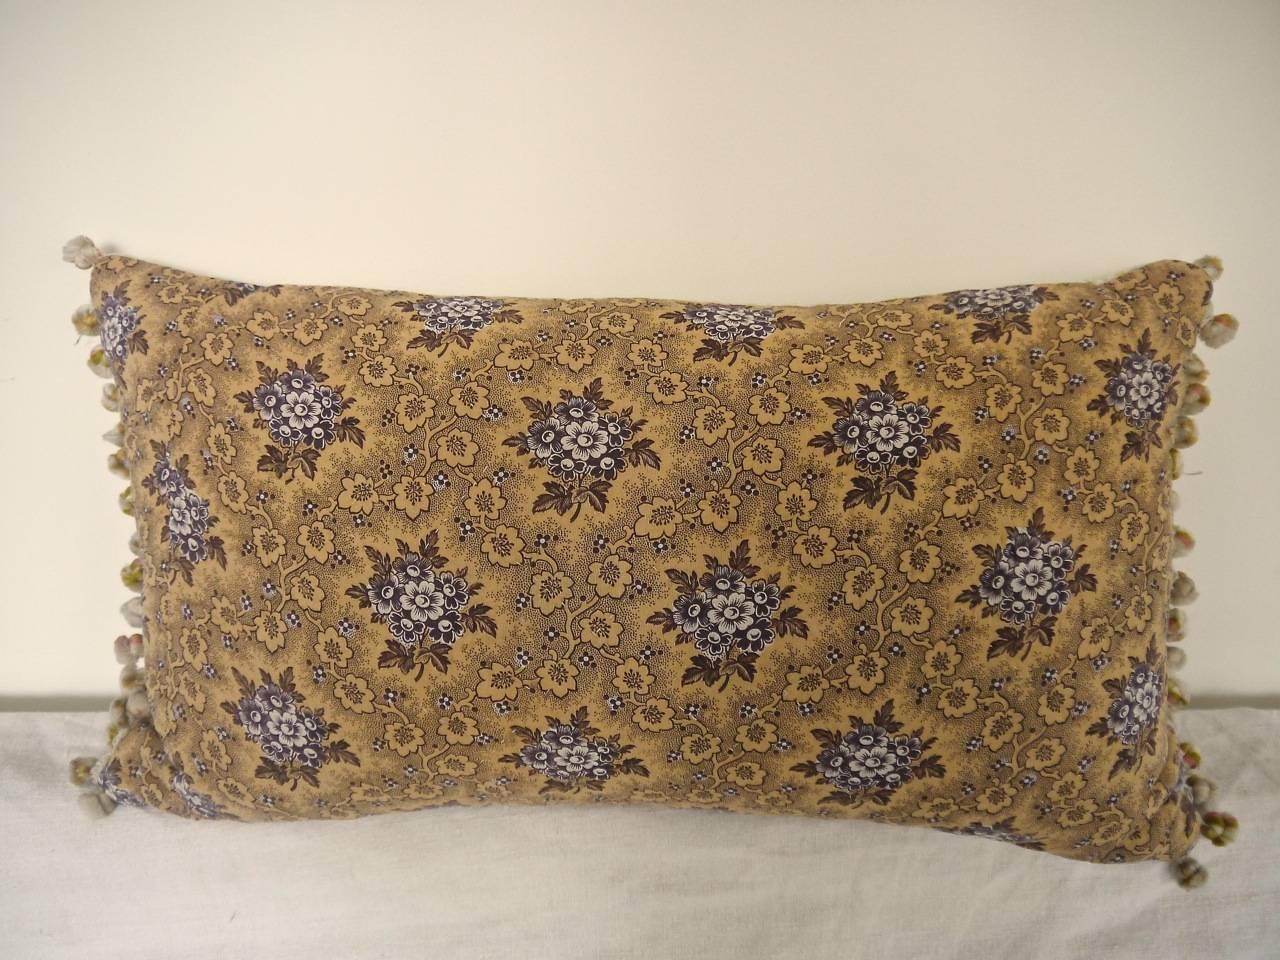 French mid-19th century printed cotton and quilted cushion edged in a pretty French antique wool bobble trim. Backed in the same quilted design with a pale yellow simple striped print. Slip stitched closed with a duck feather insert.